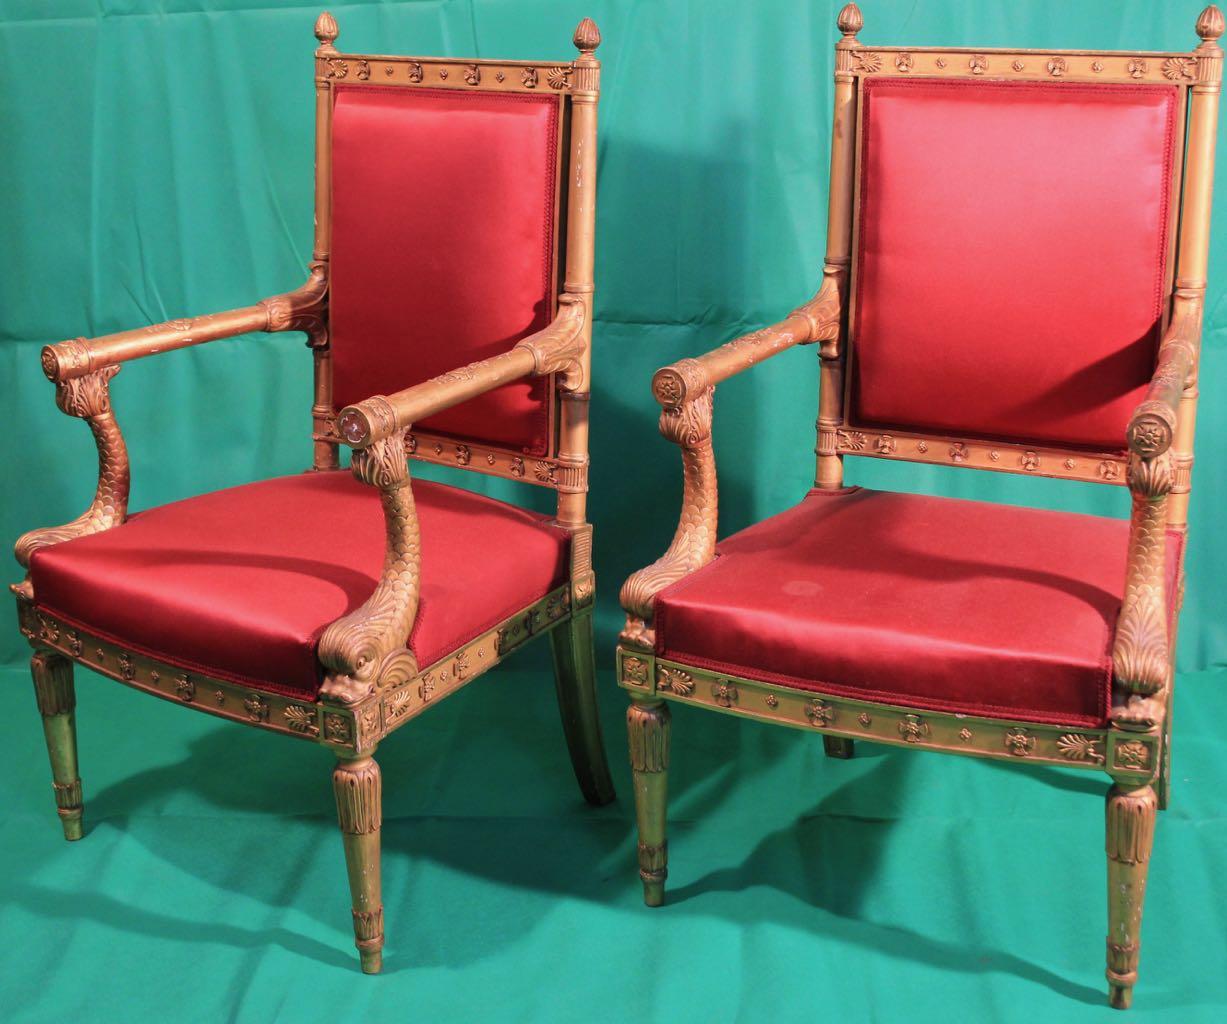 A superb pair of gilt armchairs, France, Napoleon III period, signed Quignon.

Frederic Gustave Quignon, son of Napoleon Quignon, was born in Paris on 7 November 1843. He worked with his father, became a partner in 1872, then his successor in